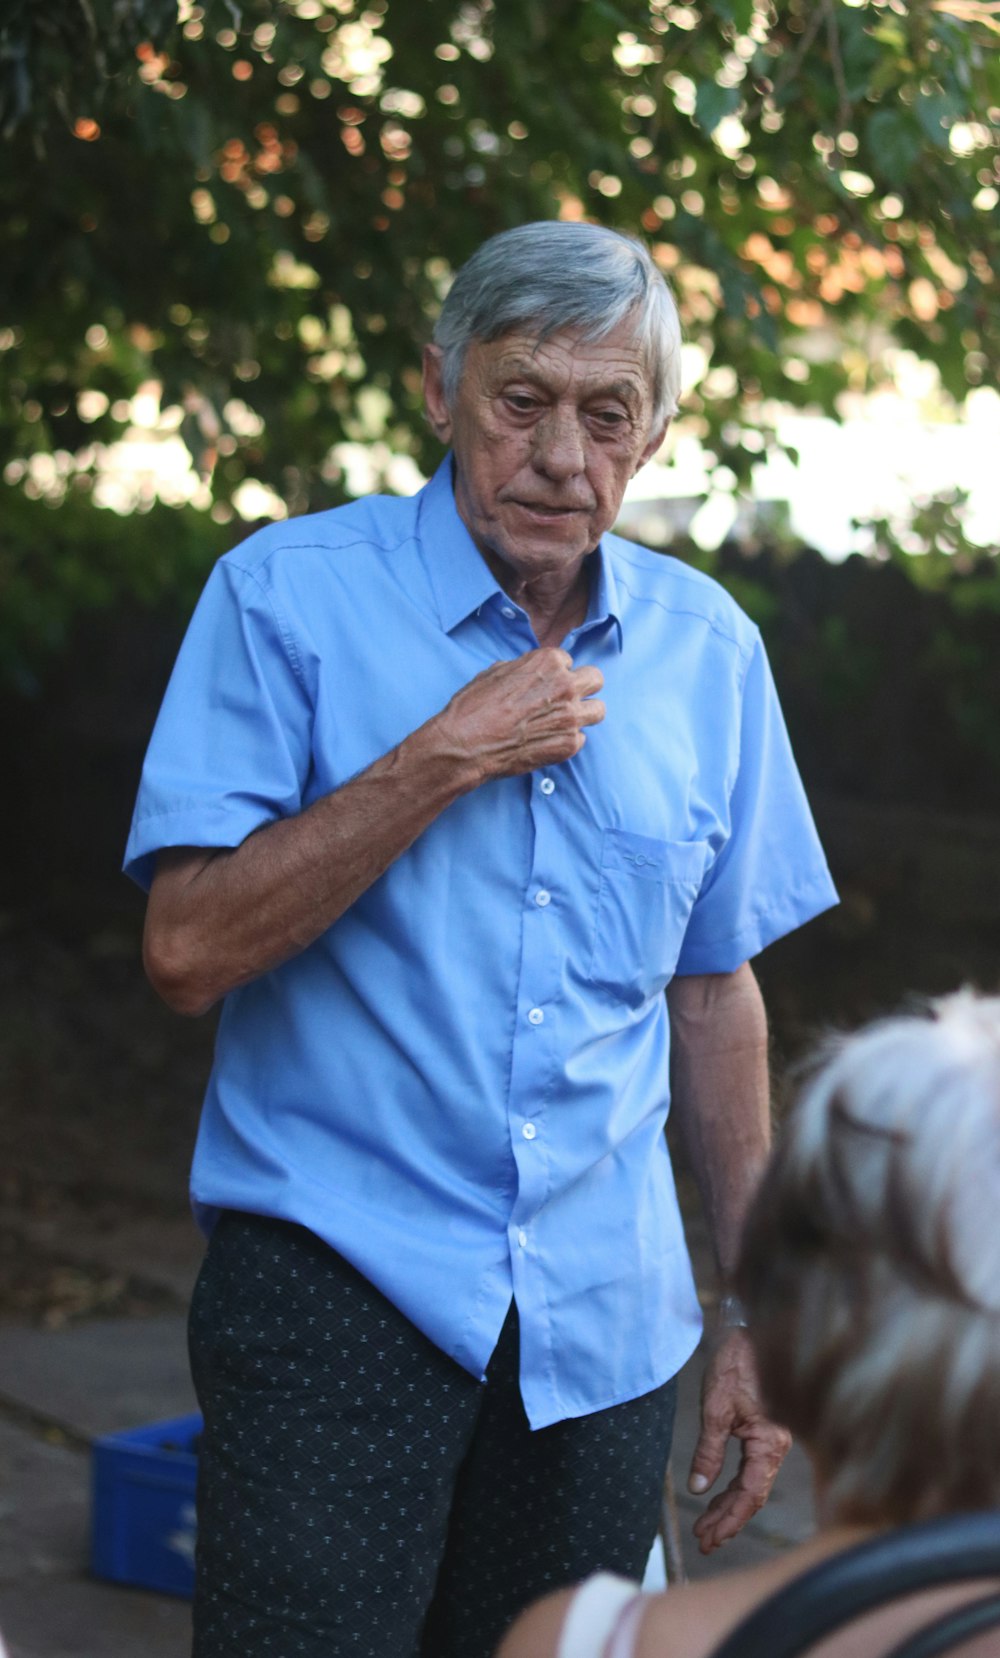 man in blue button up shirt standing near green trees during daytime